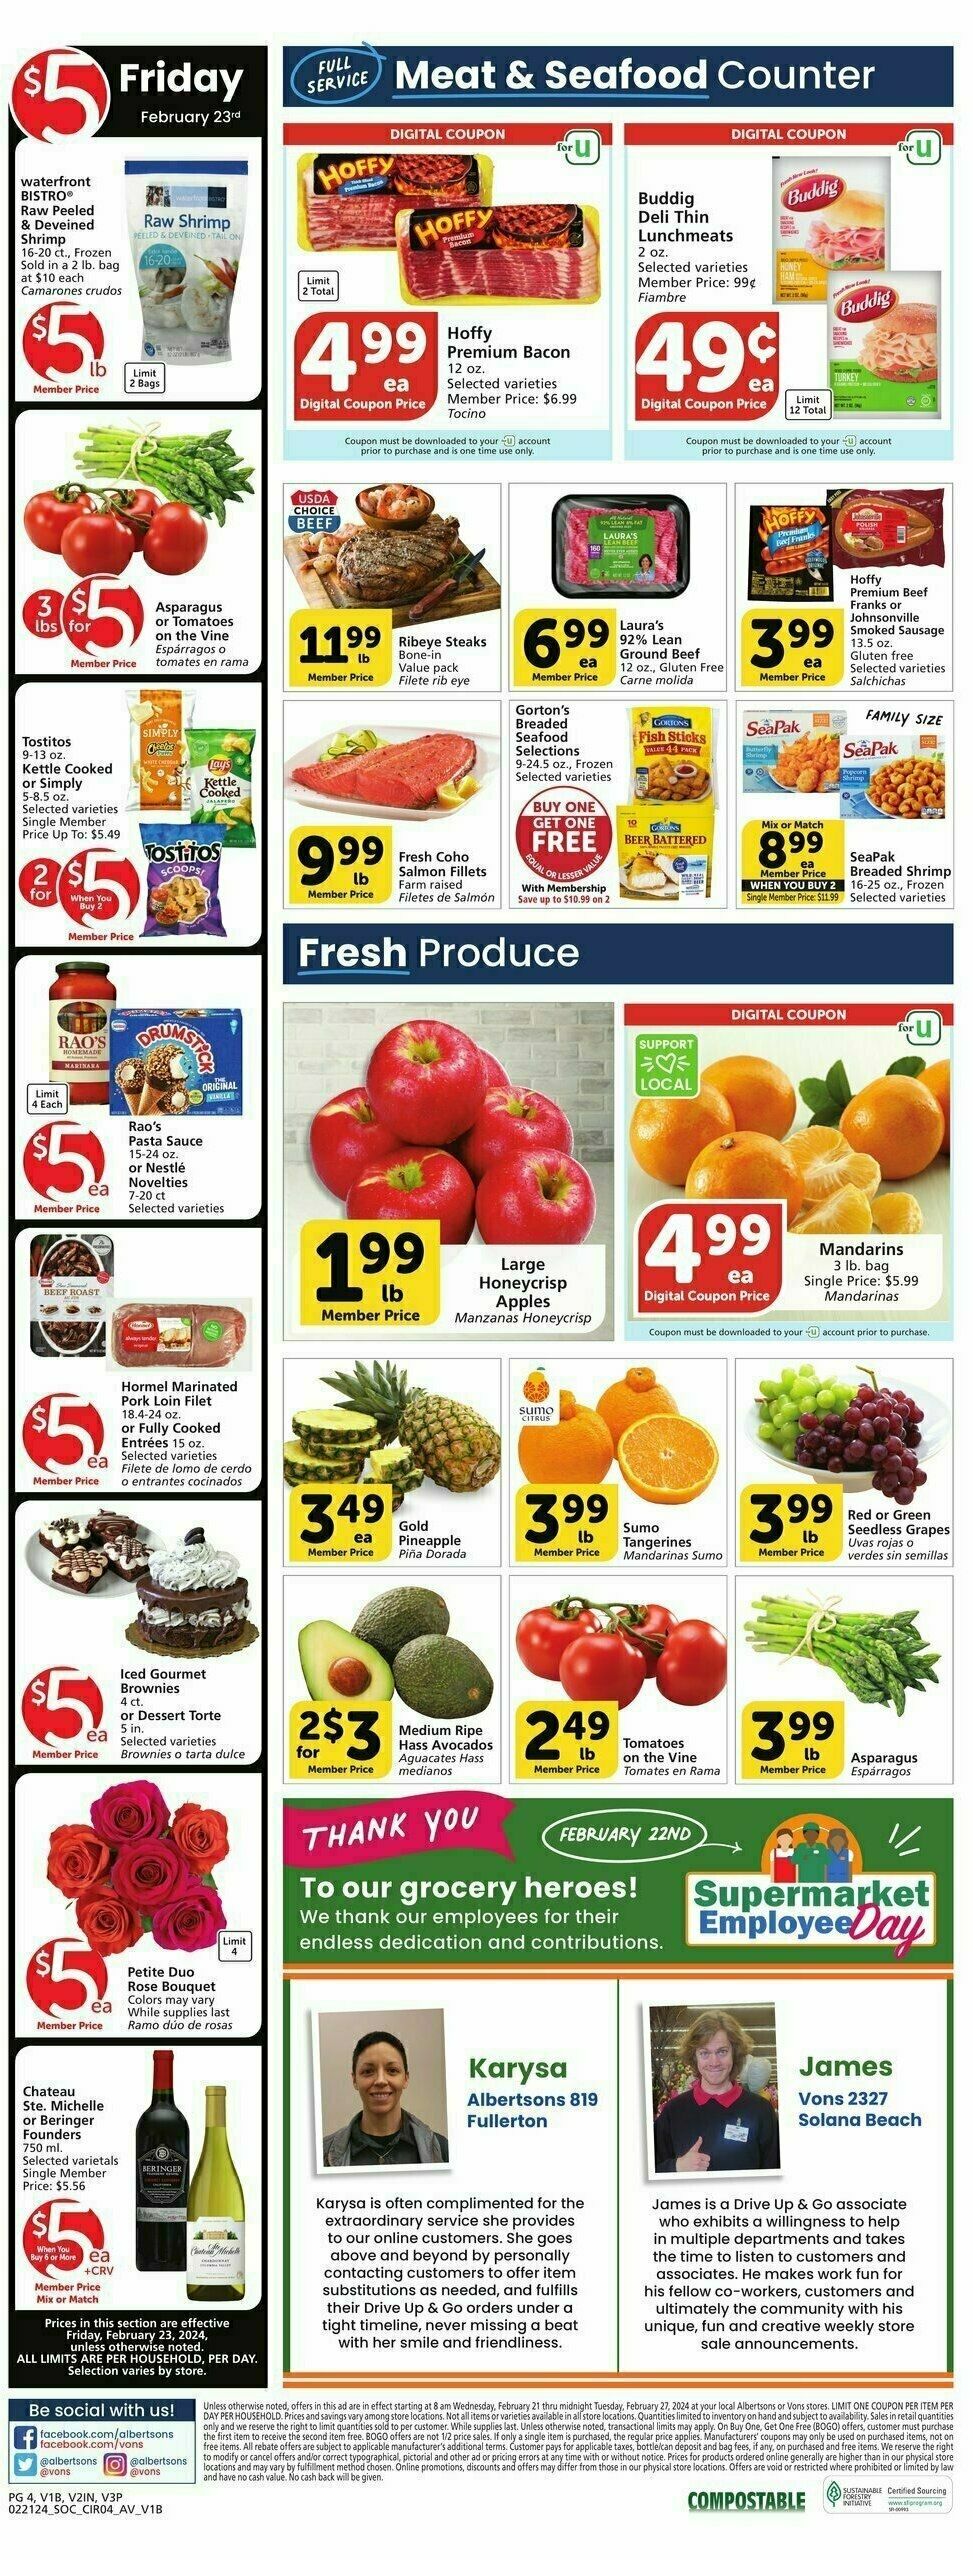 Vons Weekly Ad from February 21